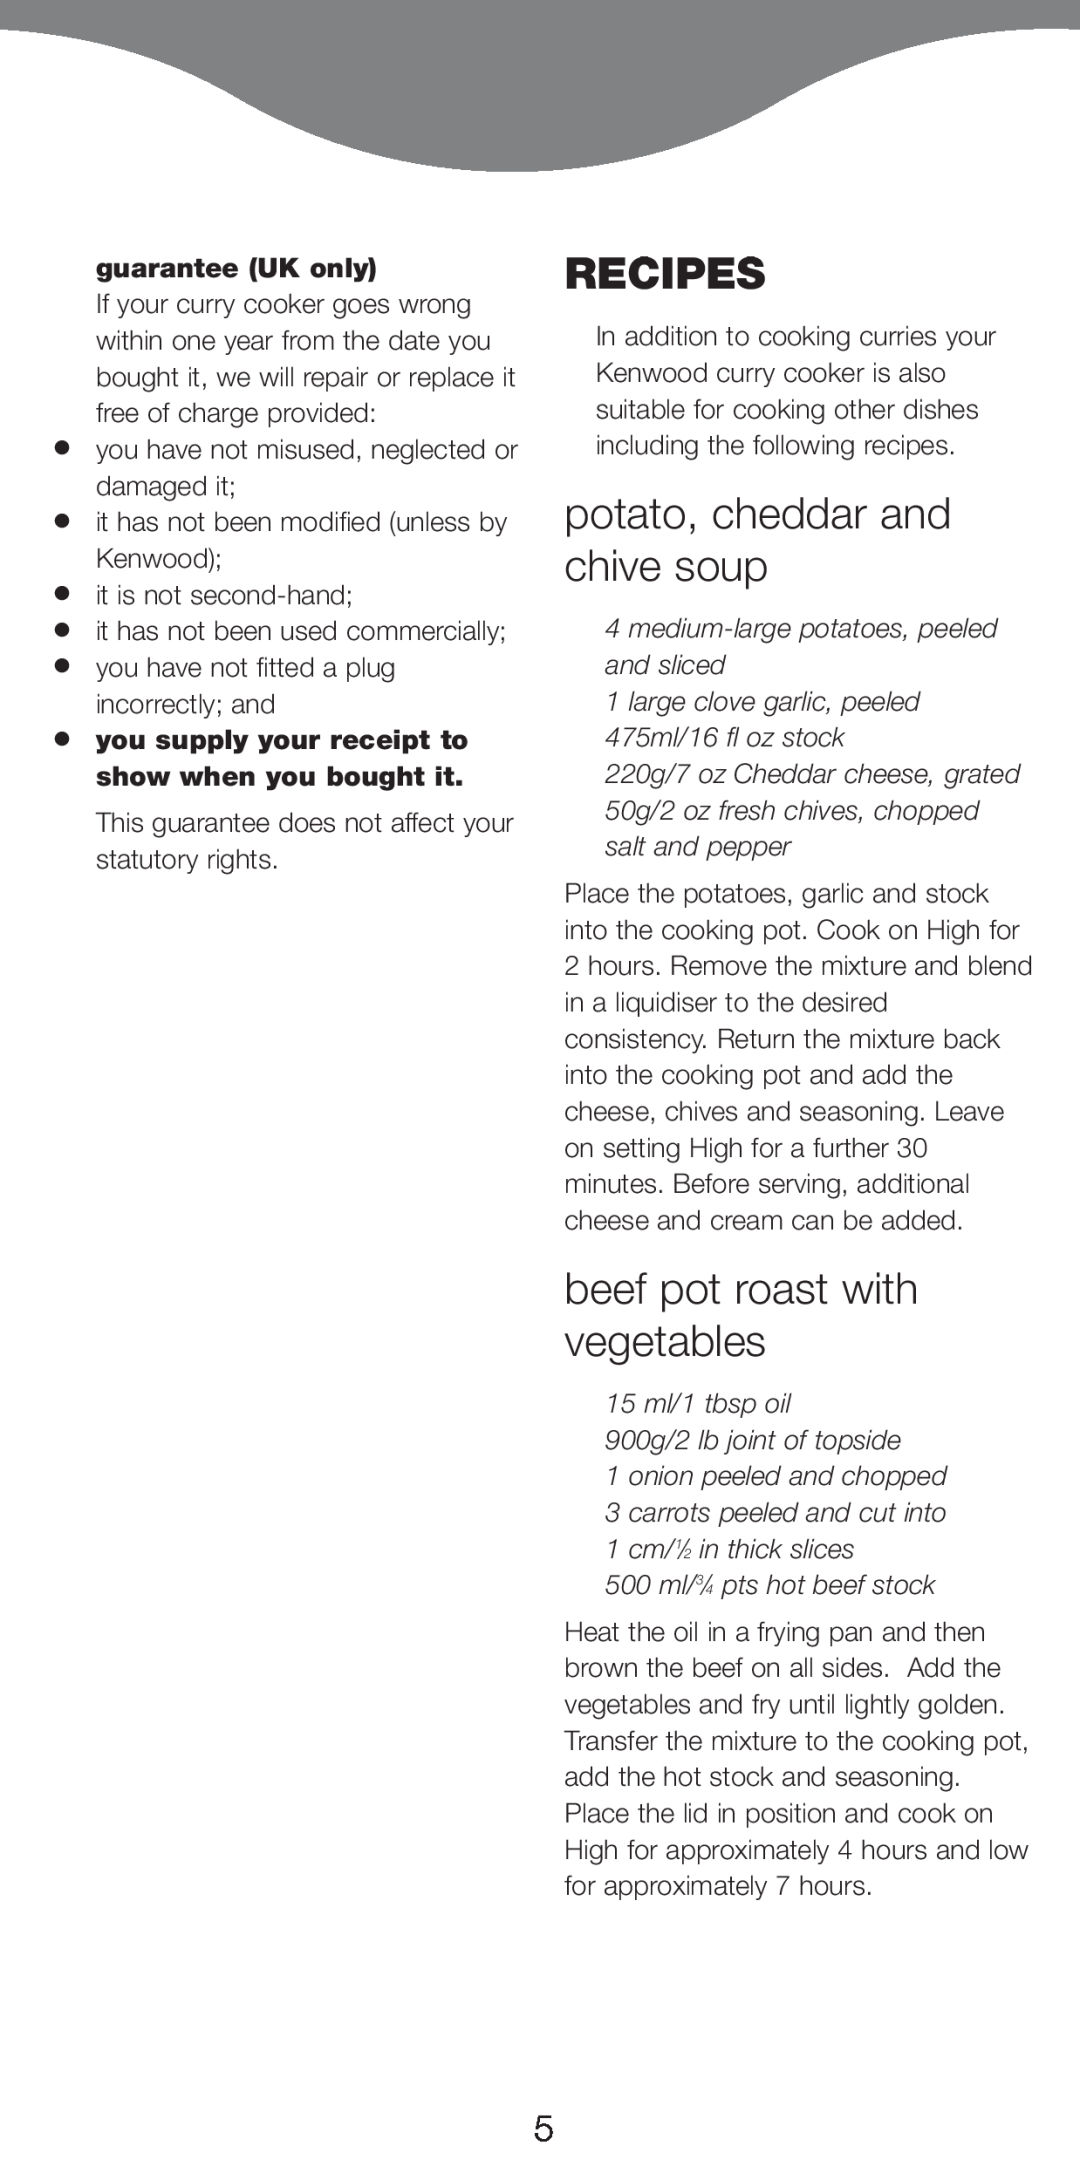 Kenwood CP665 manual potato, cheddar and chive soup, beef pot roast with vegetables, guarantee UK only, Recipes 